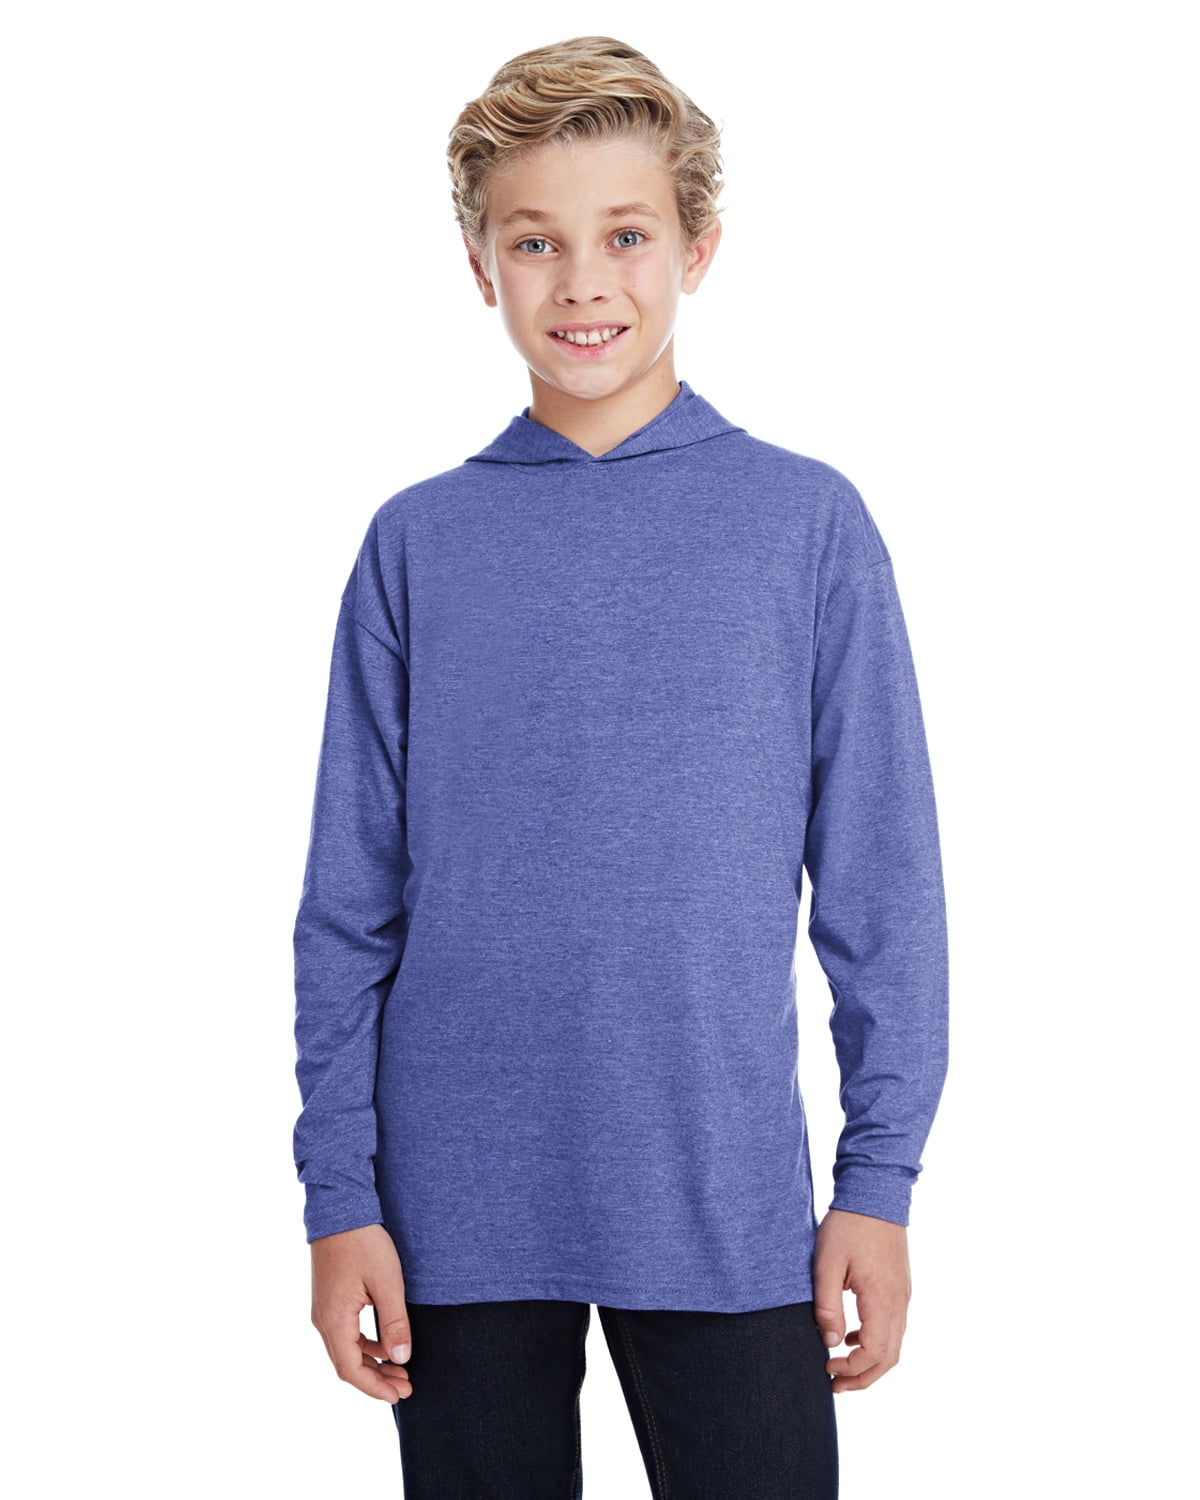 Anvil - The Anvil Youth Long-Sleeve Hooded T-Shirt - HEATHER BLUE - M ...